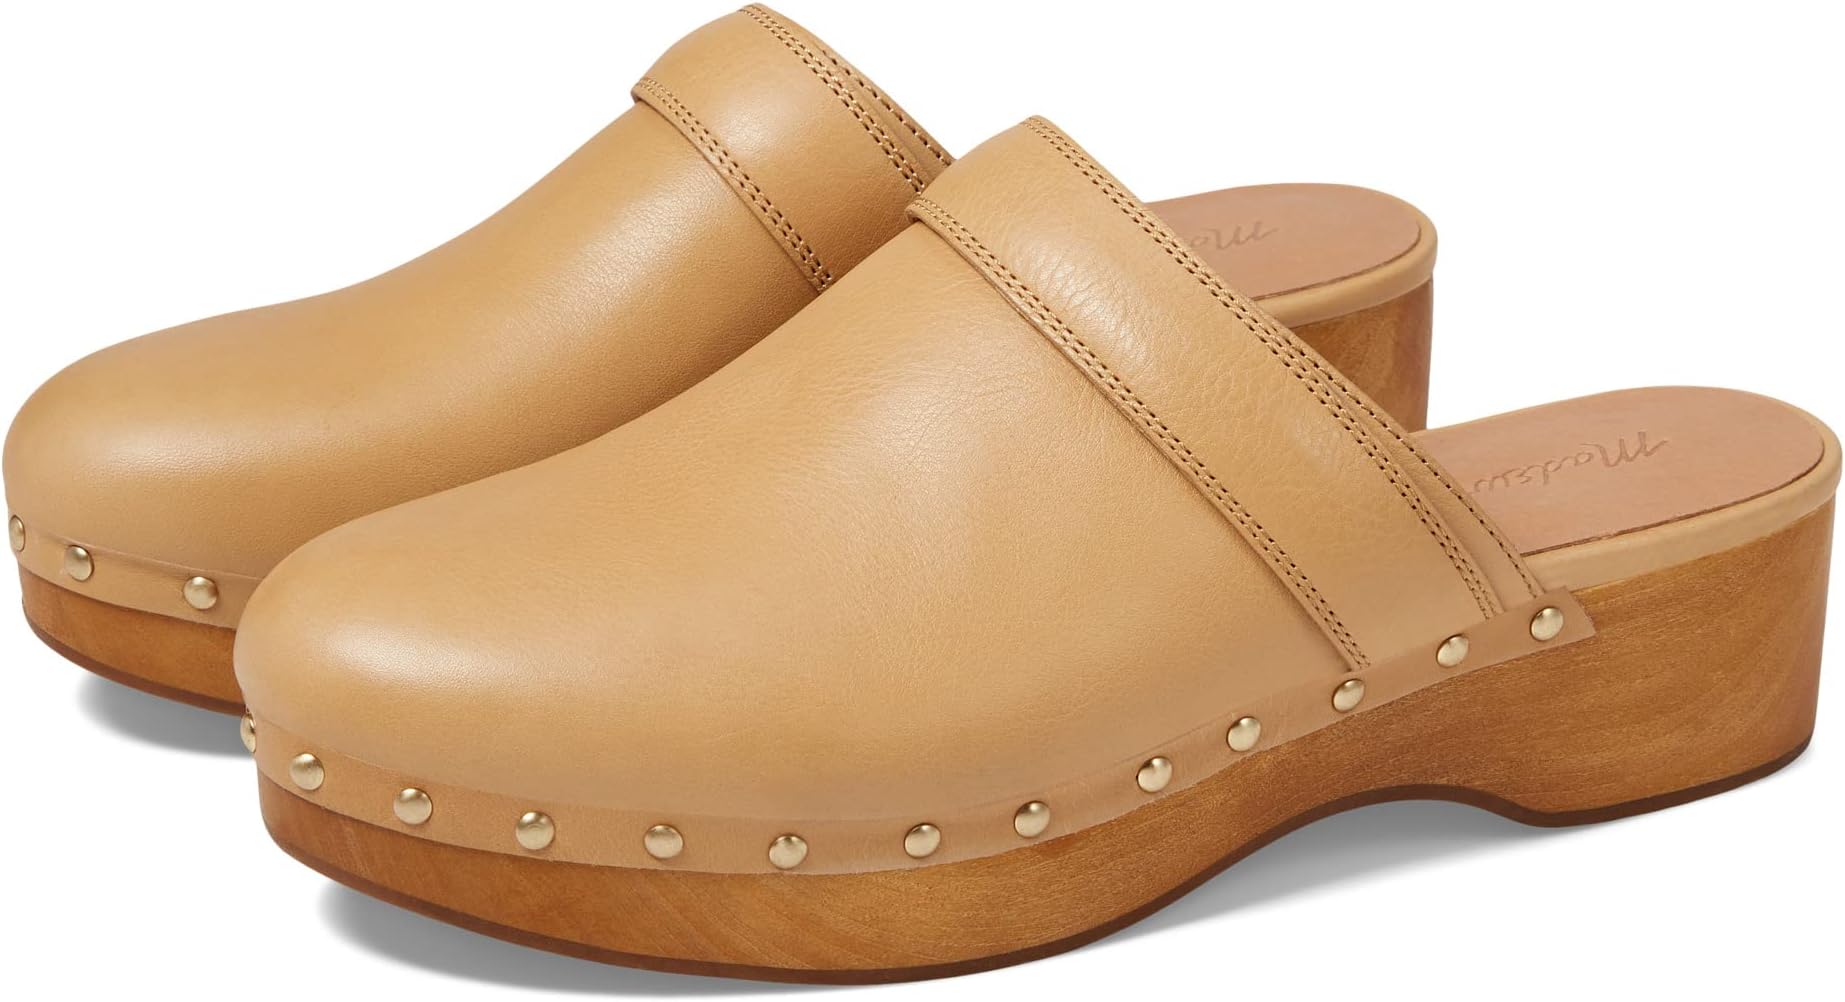 Сабо The Cecily Clog in Oiled Leather Madewell, цвет Dried Straw